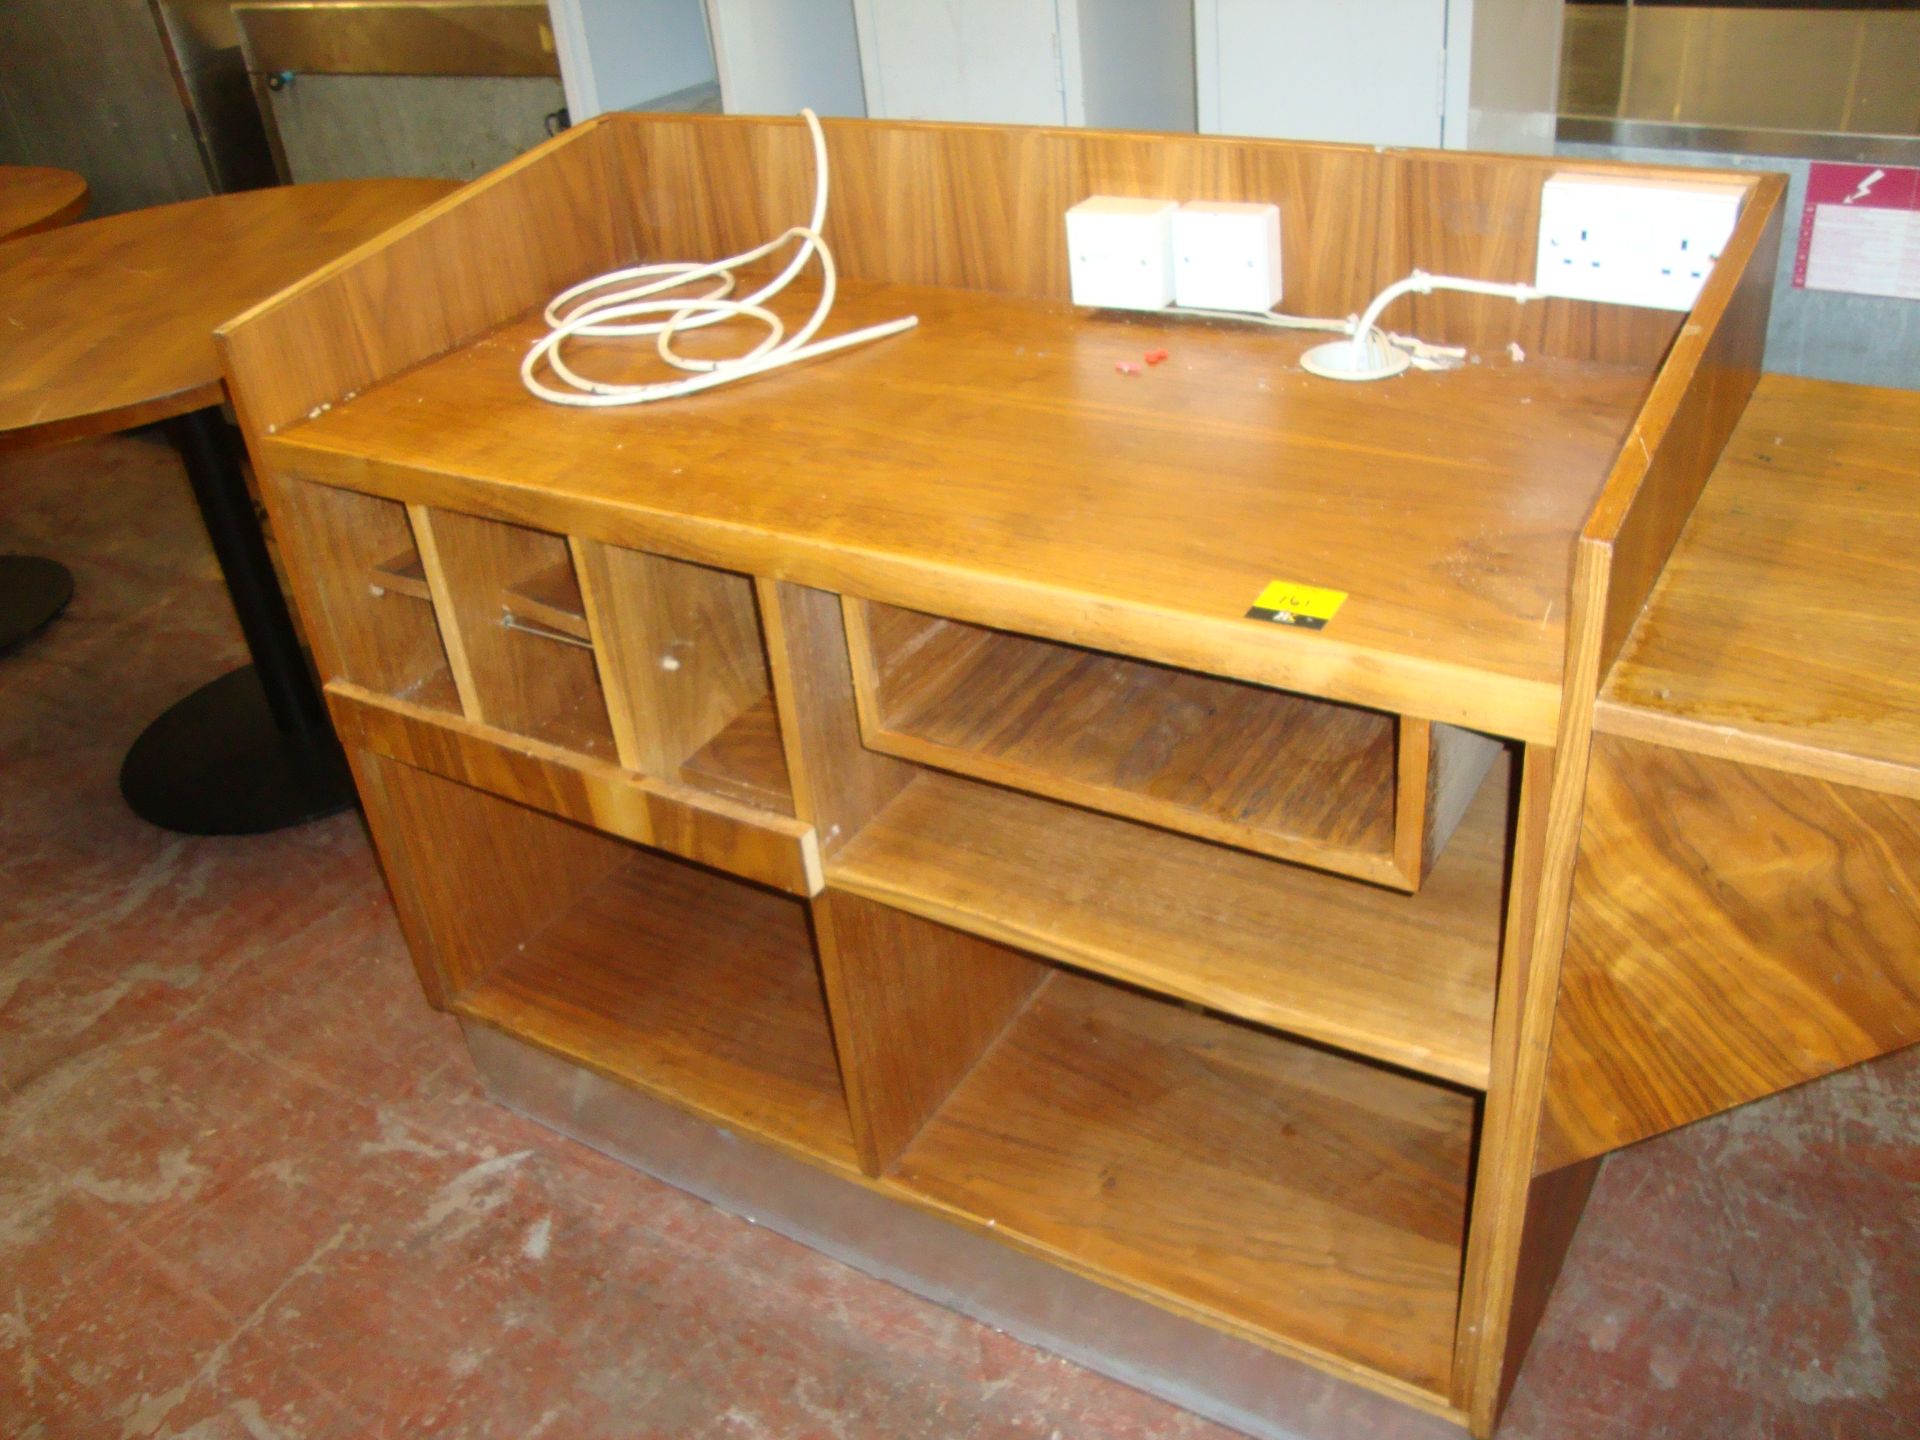 Wooden serving/buffet unit with built-in electrics & phone sockets, incorporating extending shelf, - Image 3 of 3